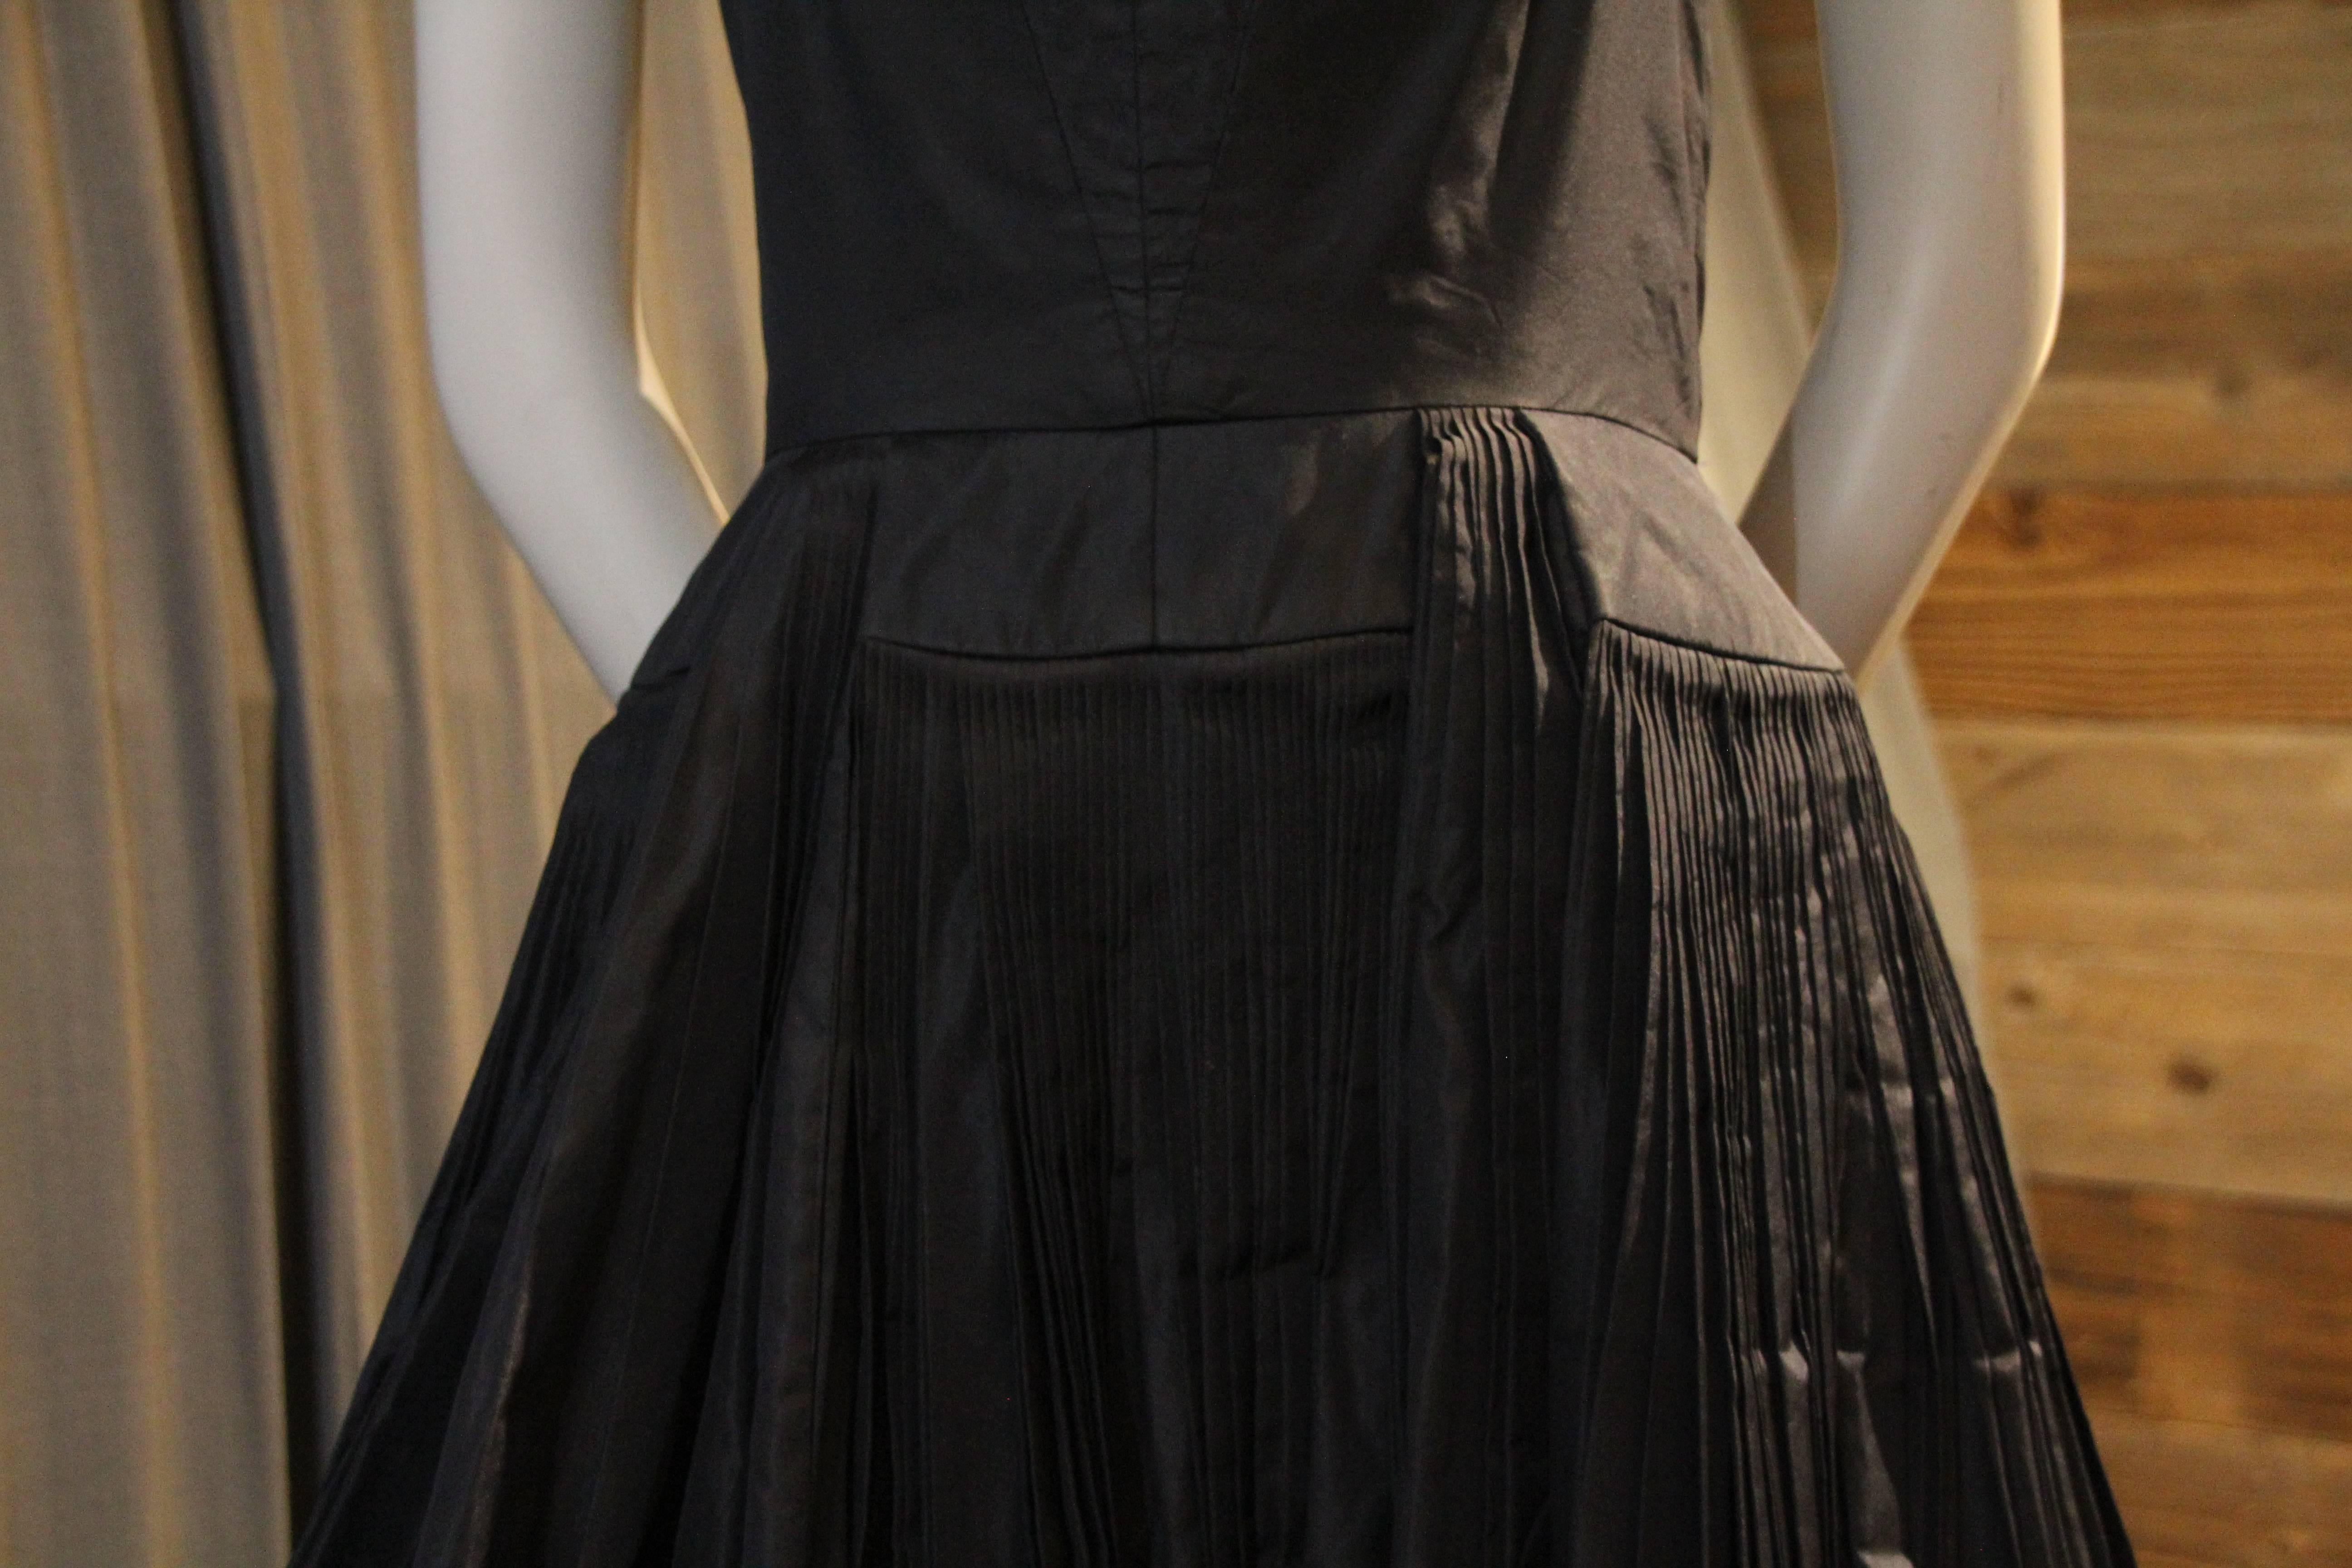 An exquisite 1950s James Galanos full-skirted black silk taffeta halter dress: Incredible and dense knife-pleats form the full circle skirt.  This is a couture quality dress executed in classic Galanos quality and style. 